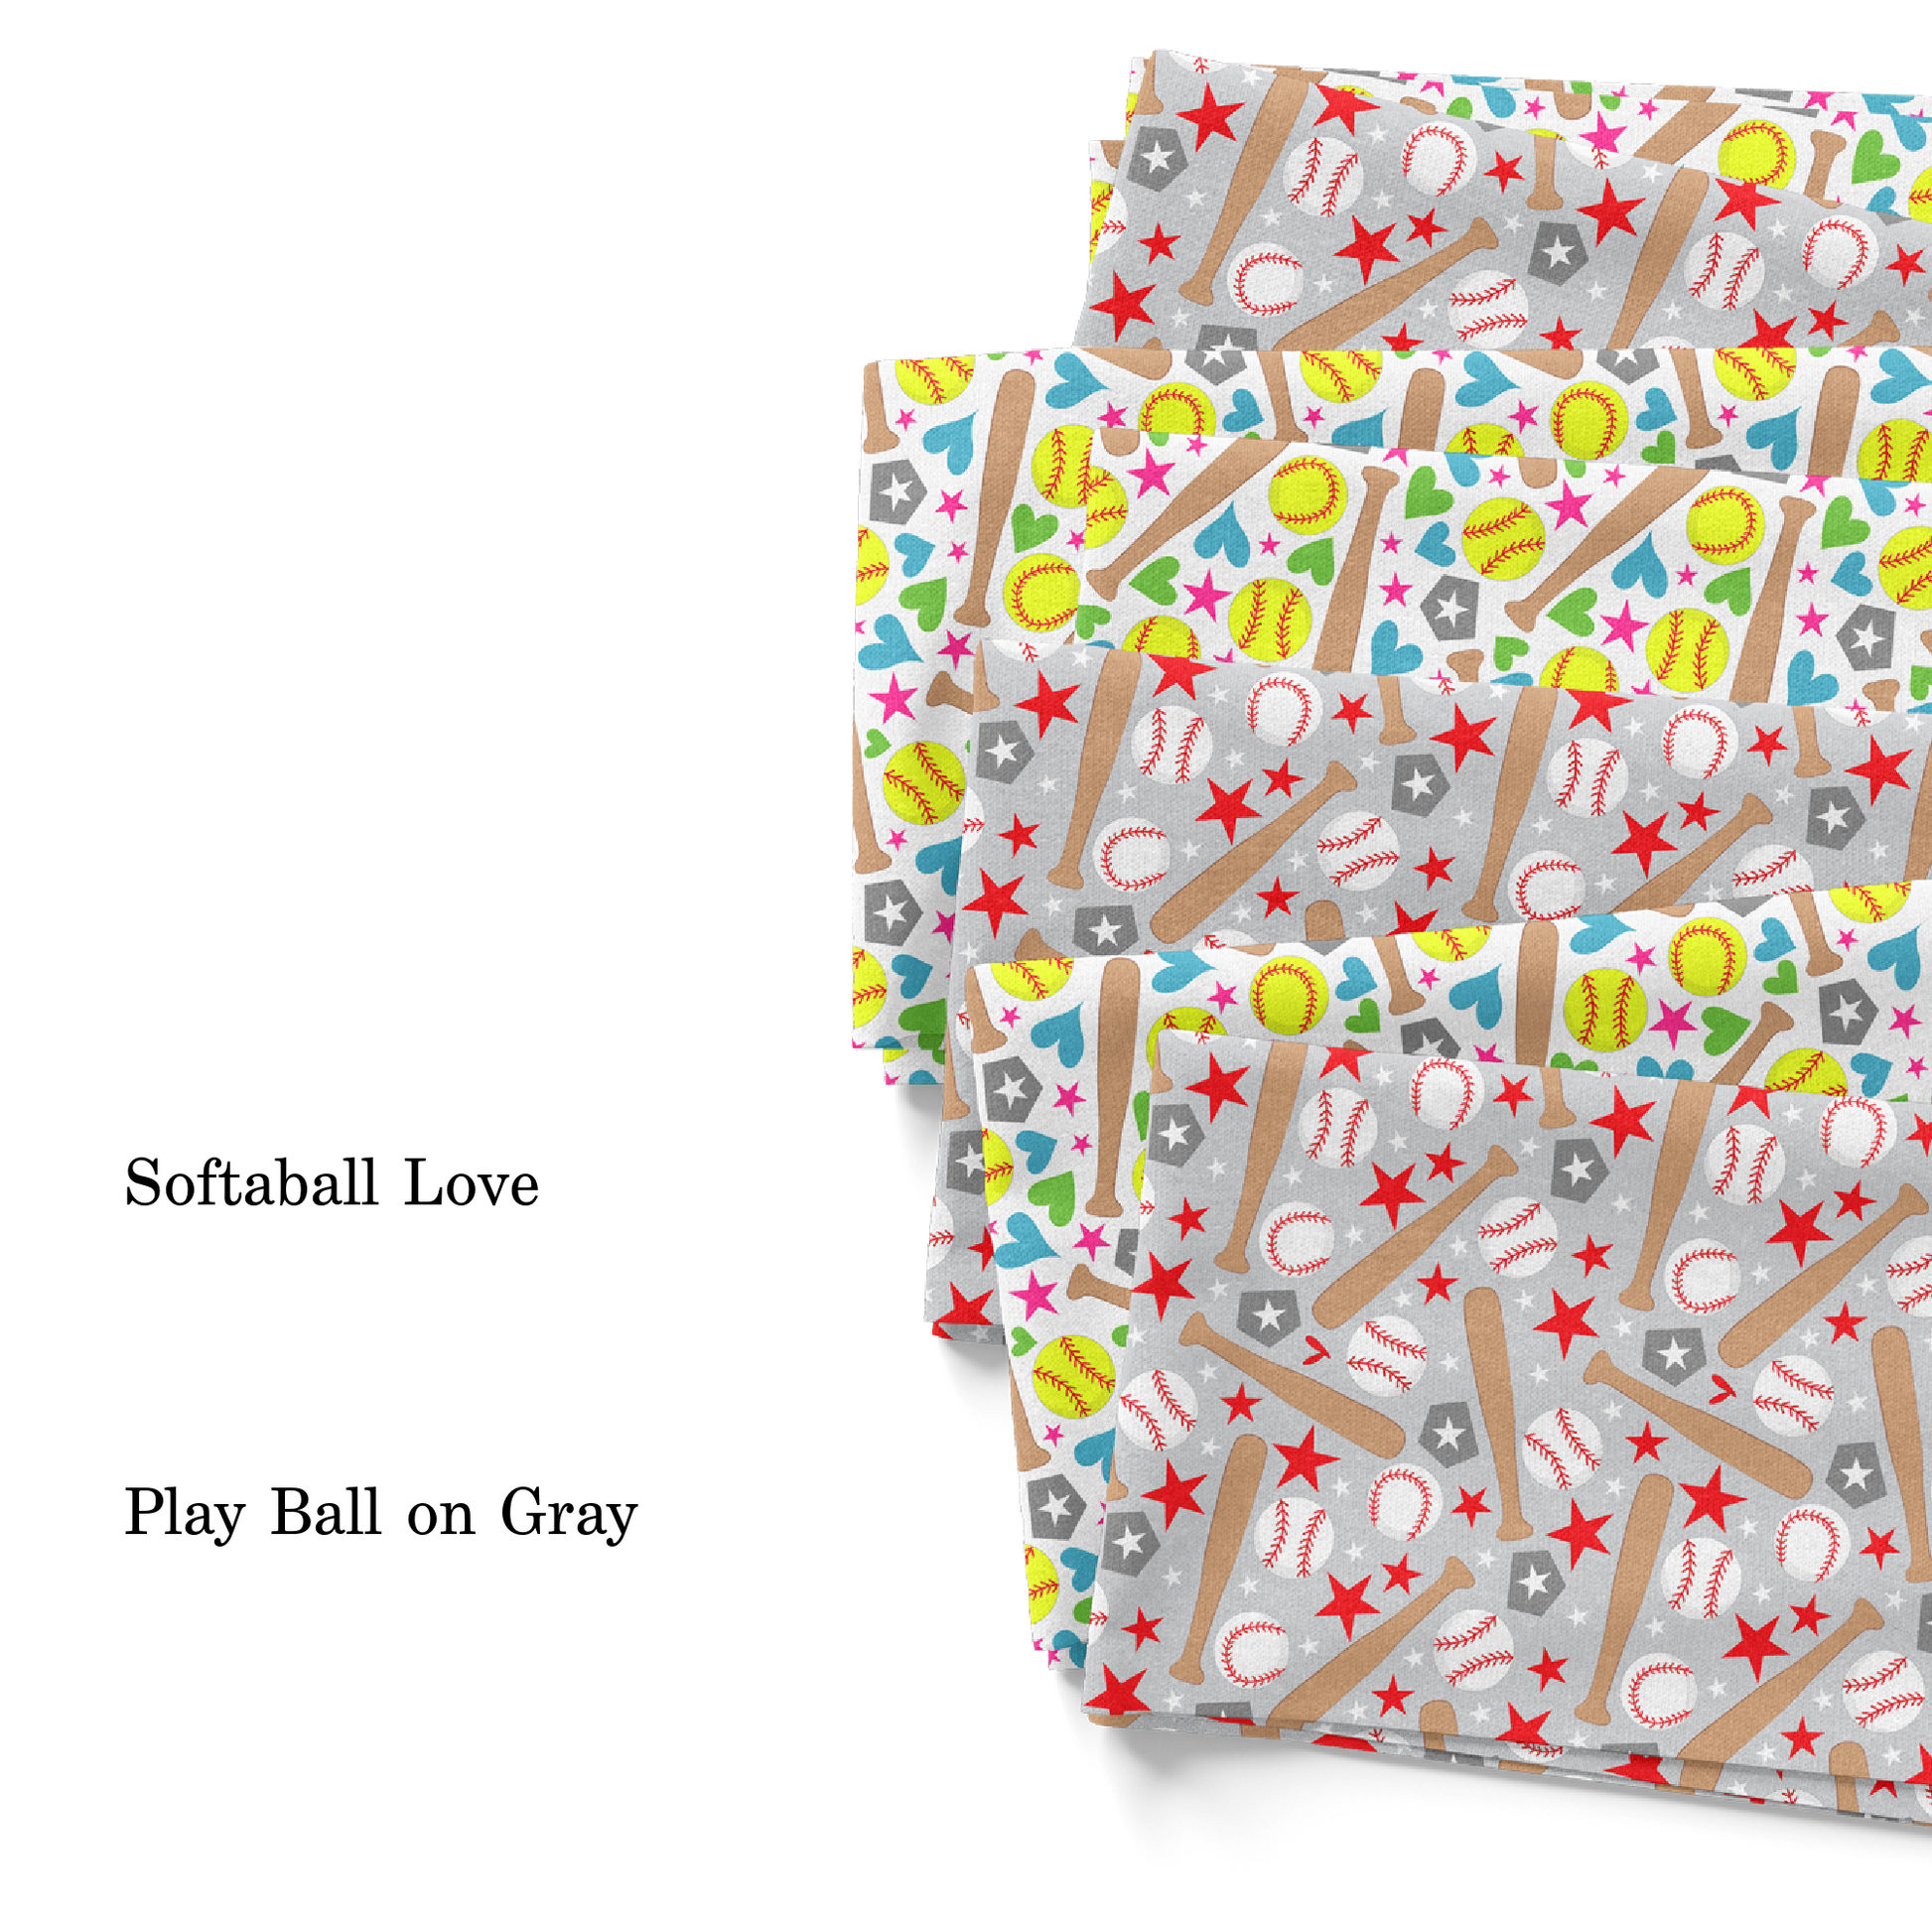 Pip Supply baseball and softball sports collection fabric swatches with pattern names.